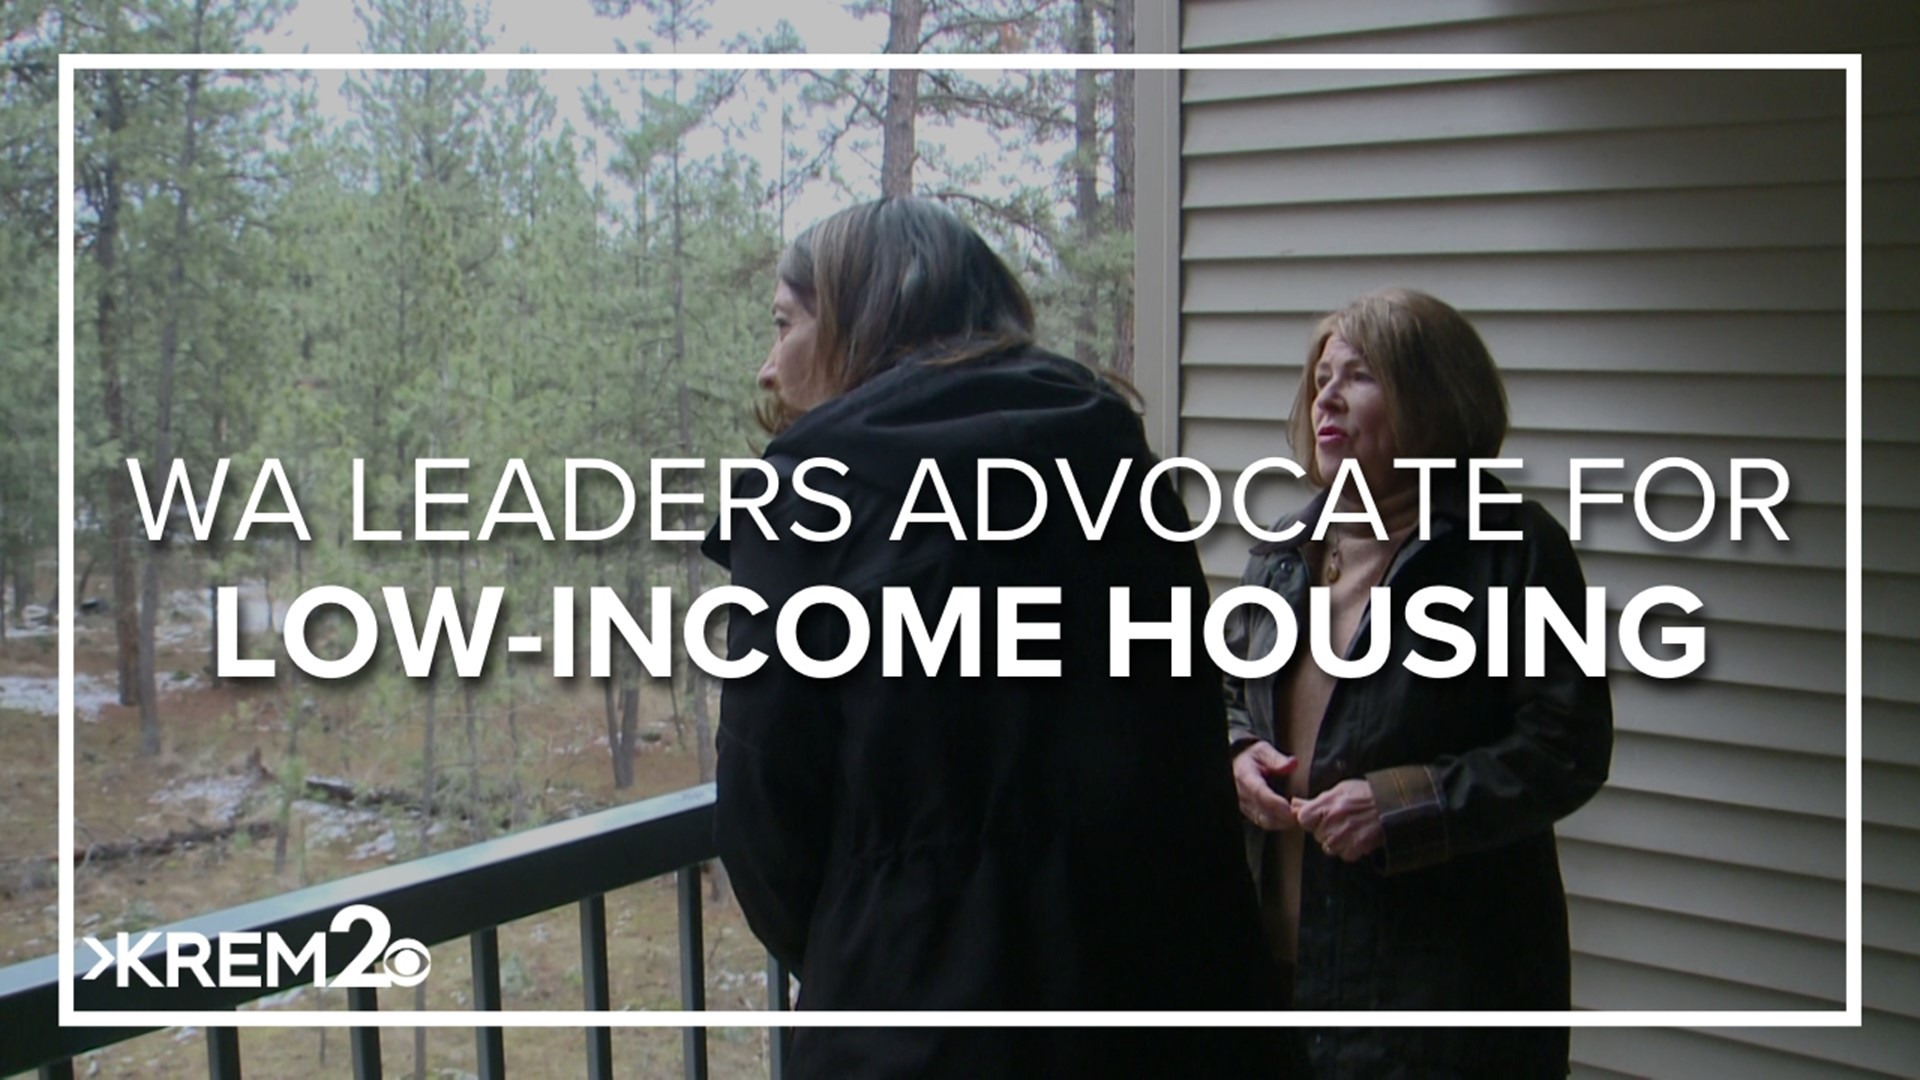 Right now, the need for low-income housing in Spokane is critical.